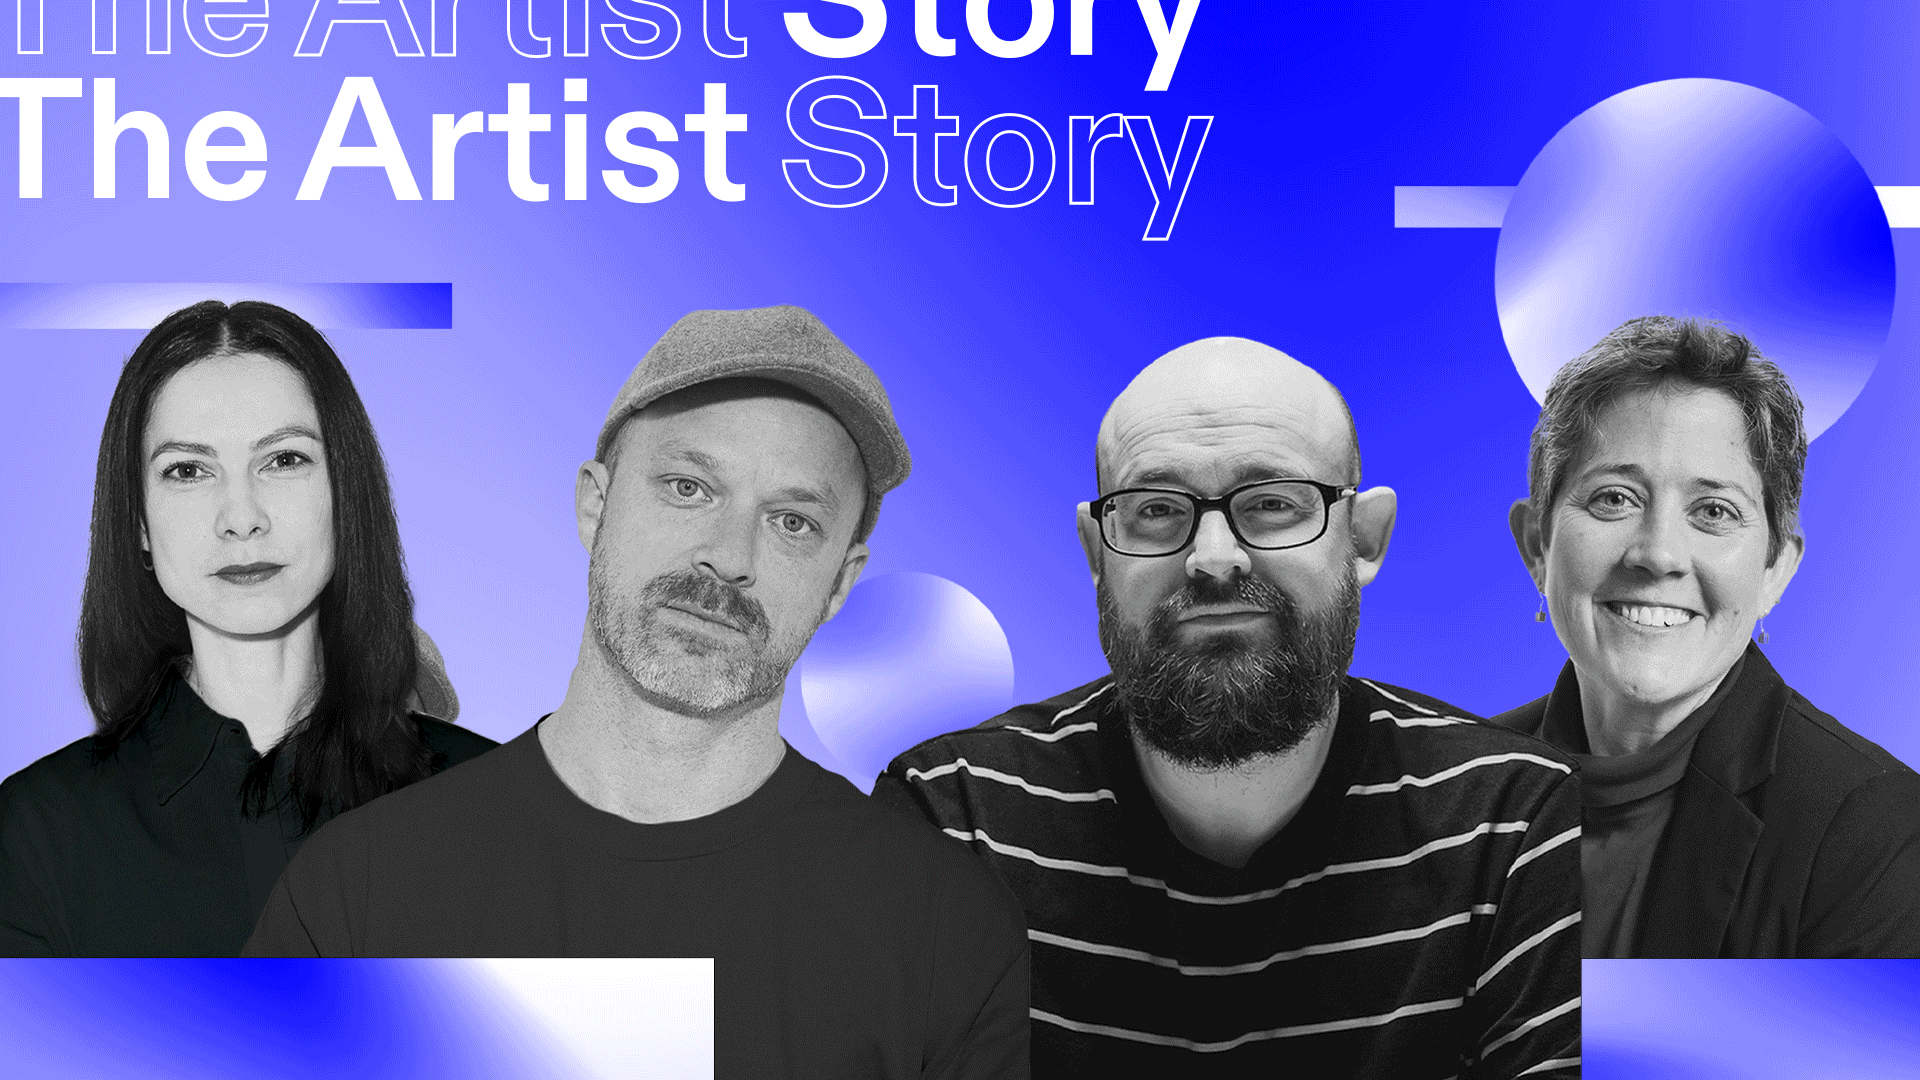 Battle Royal Team Members in graphic for the Artist Story